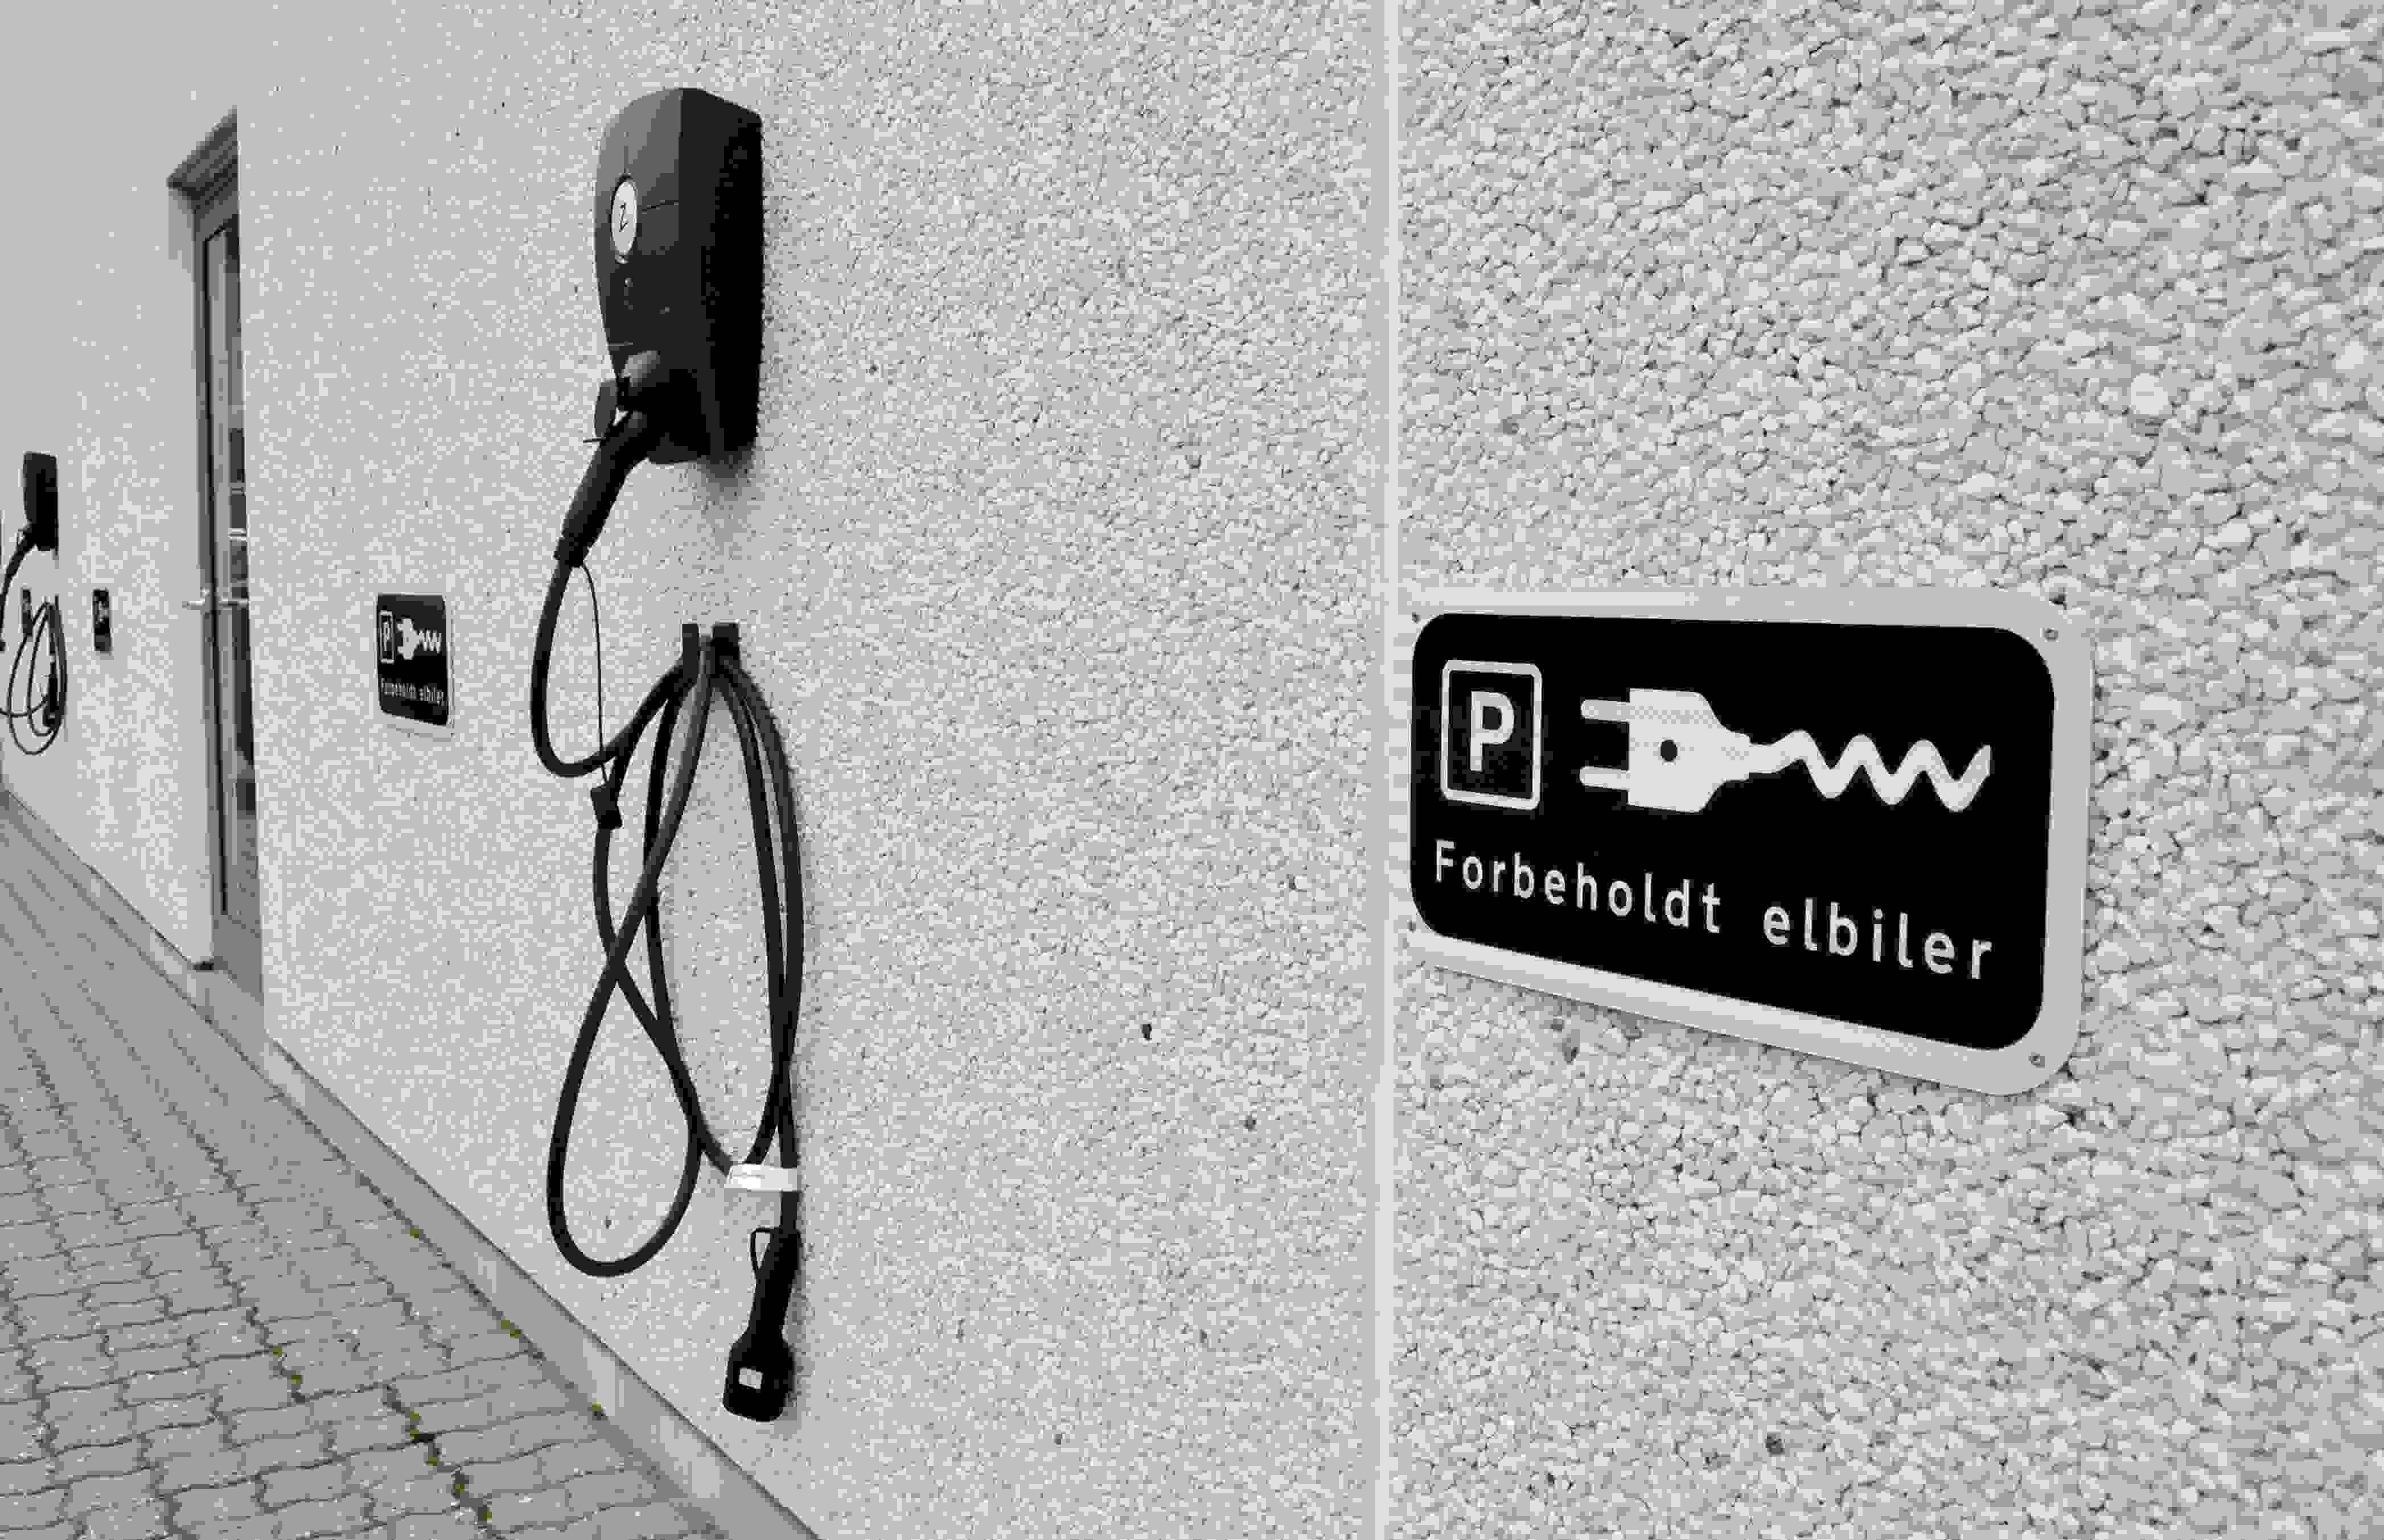 Charging station with sign - for electric cars only